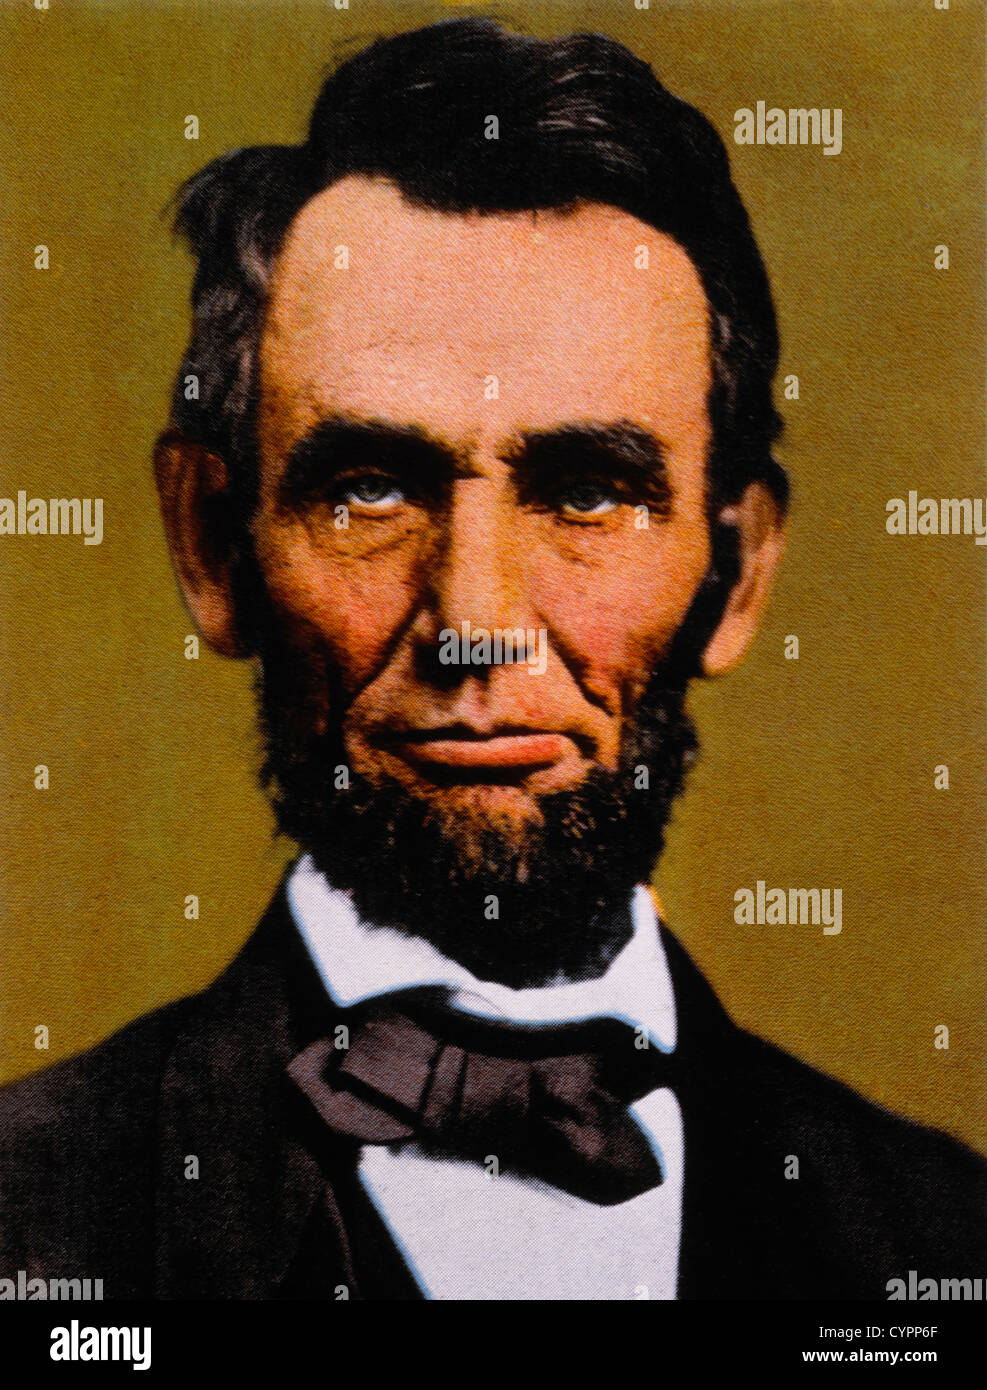 Abraham Lincoln (1809-1865), 16th President of the United States, Portrait Stock Photo